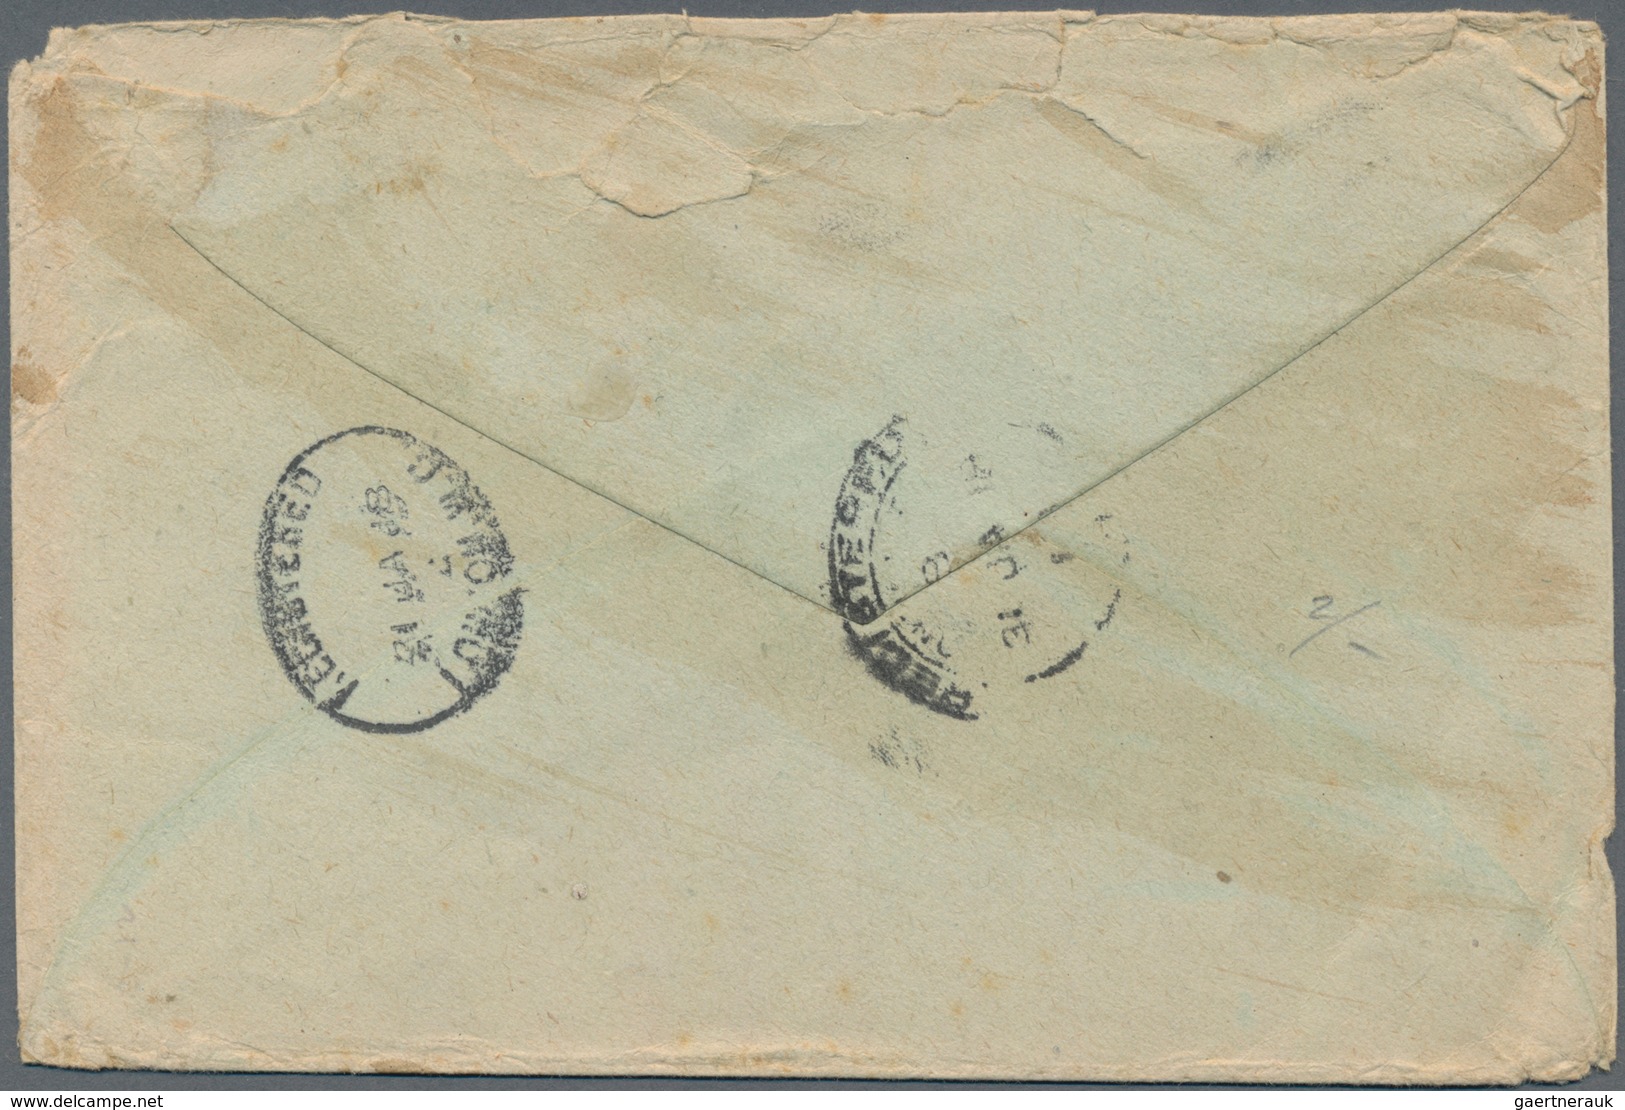 Indien - Feldpost: 1917 Registered Cover From Indian Base Office B In Dar-es-Salam, Tanganyika To Lo - Military Service Stamp